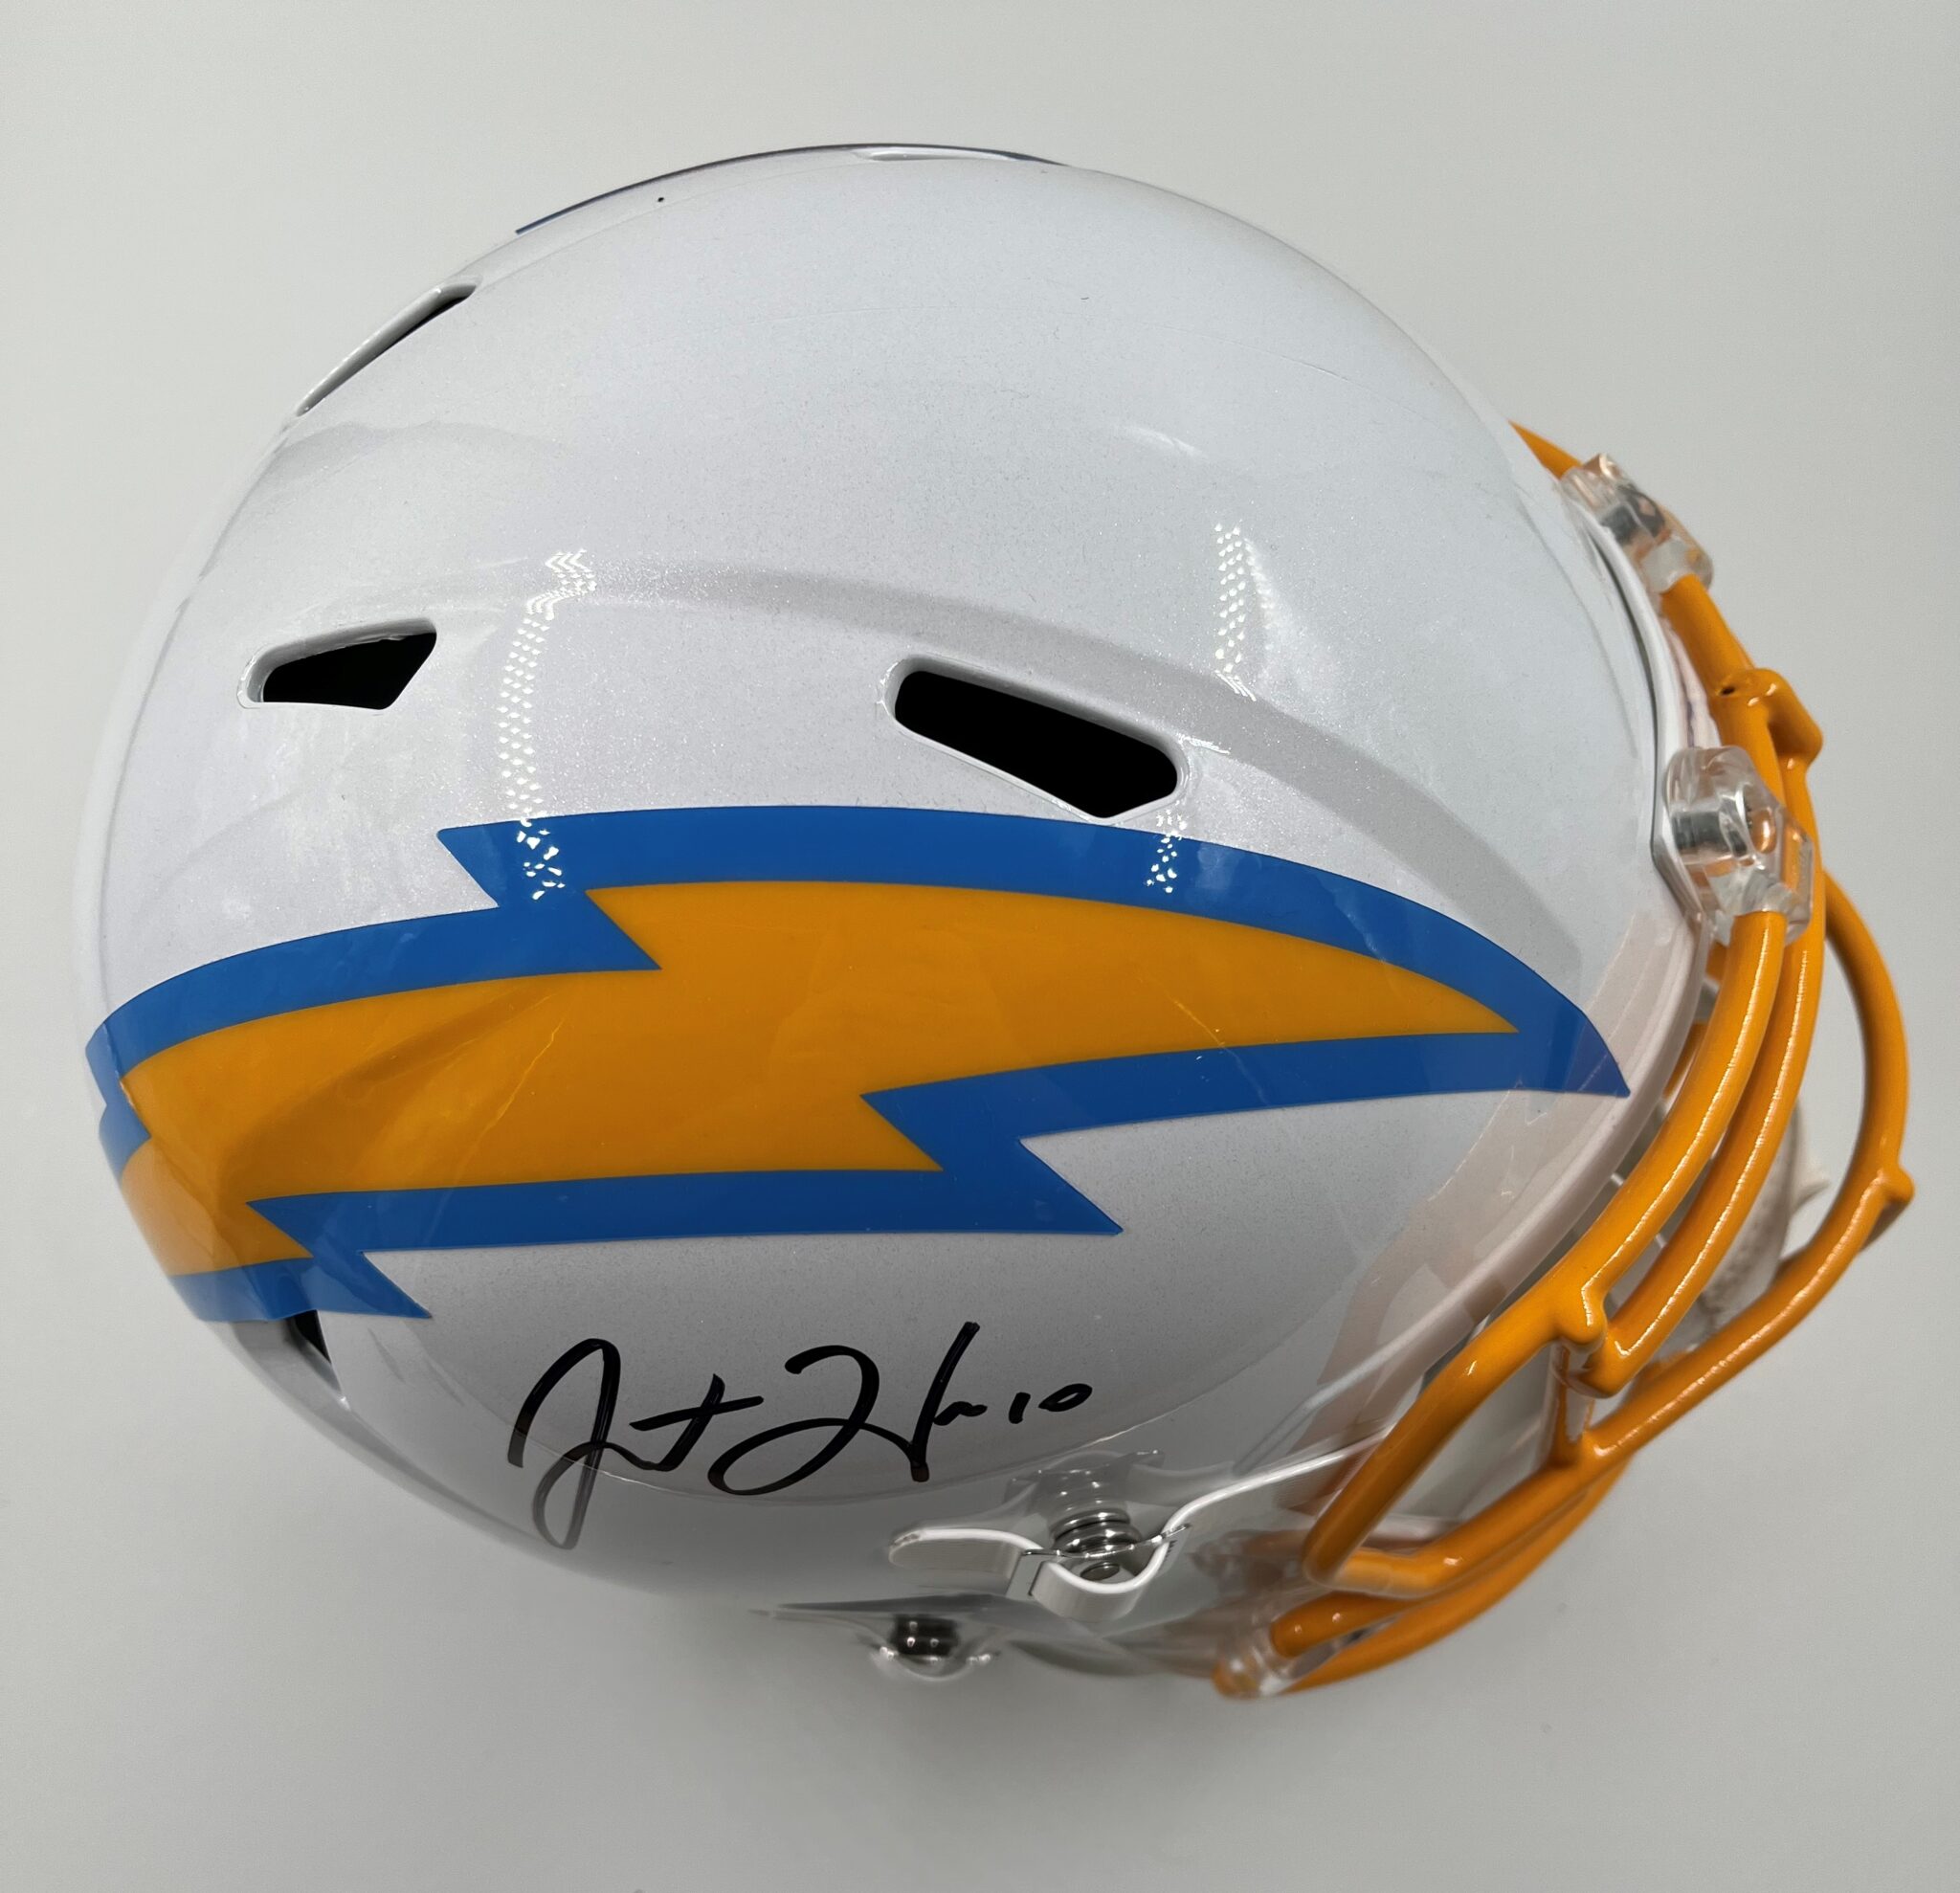 Justin Herbert Signed Autographed Los Angeles Chargers Jersey BAS